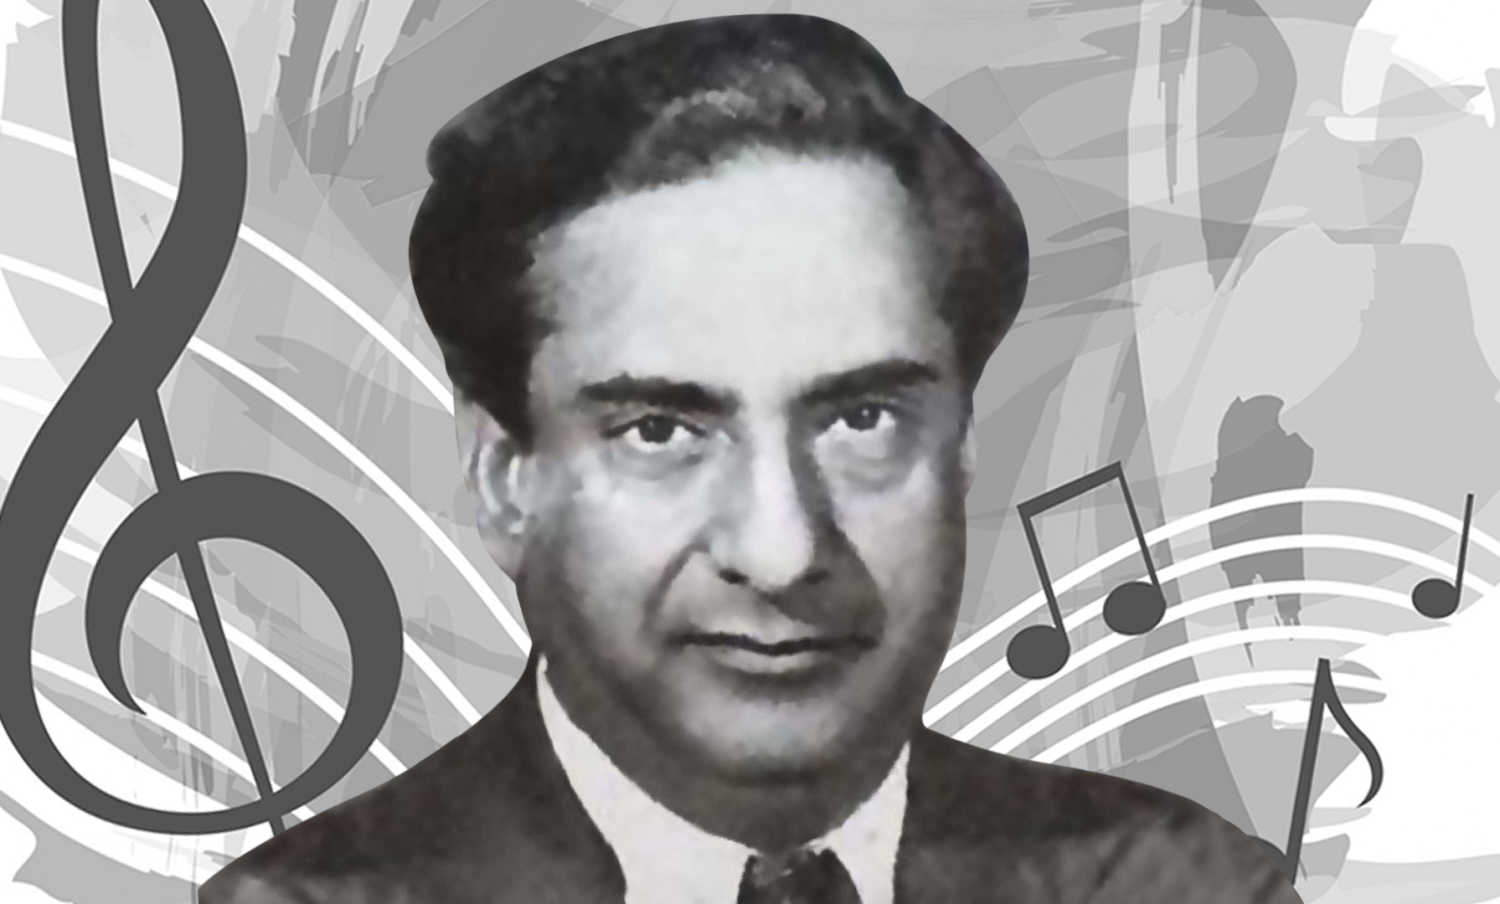 Renowned music composer Master Ghulam Haider remembered